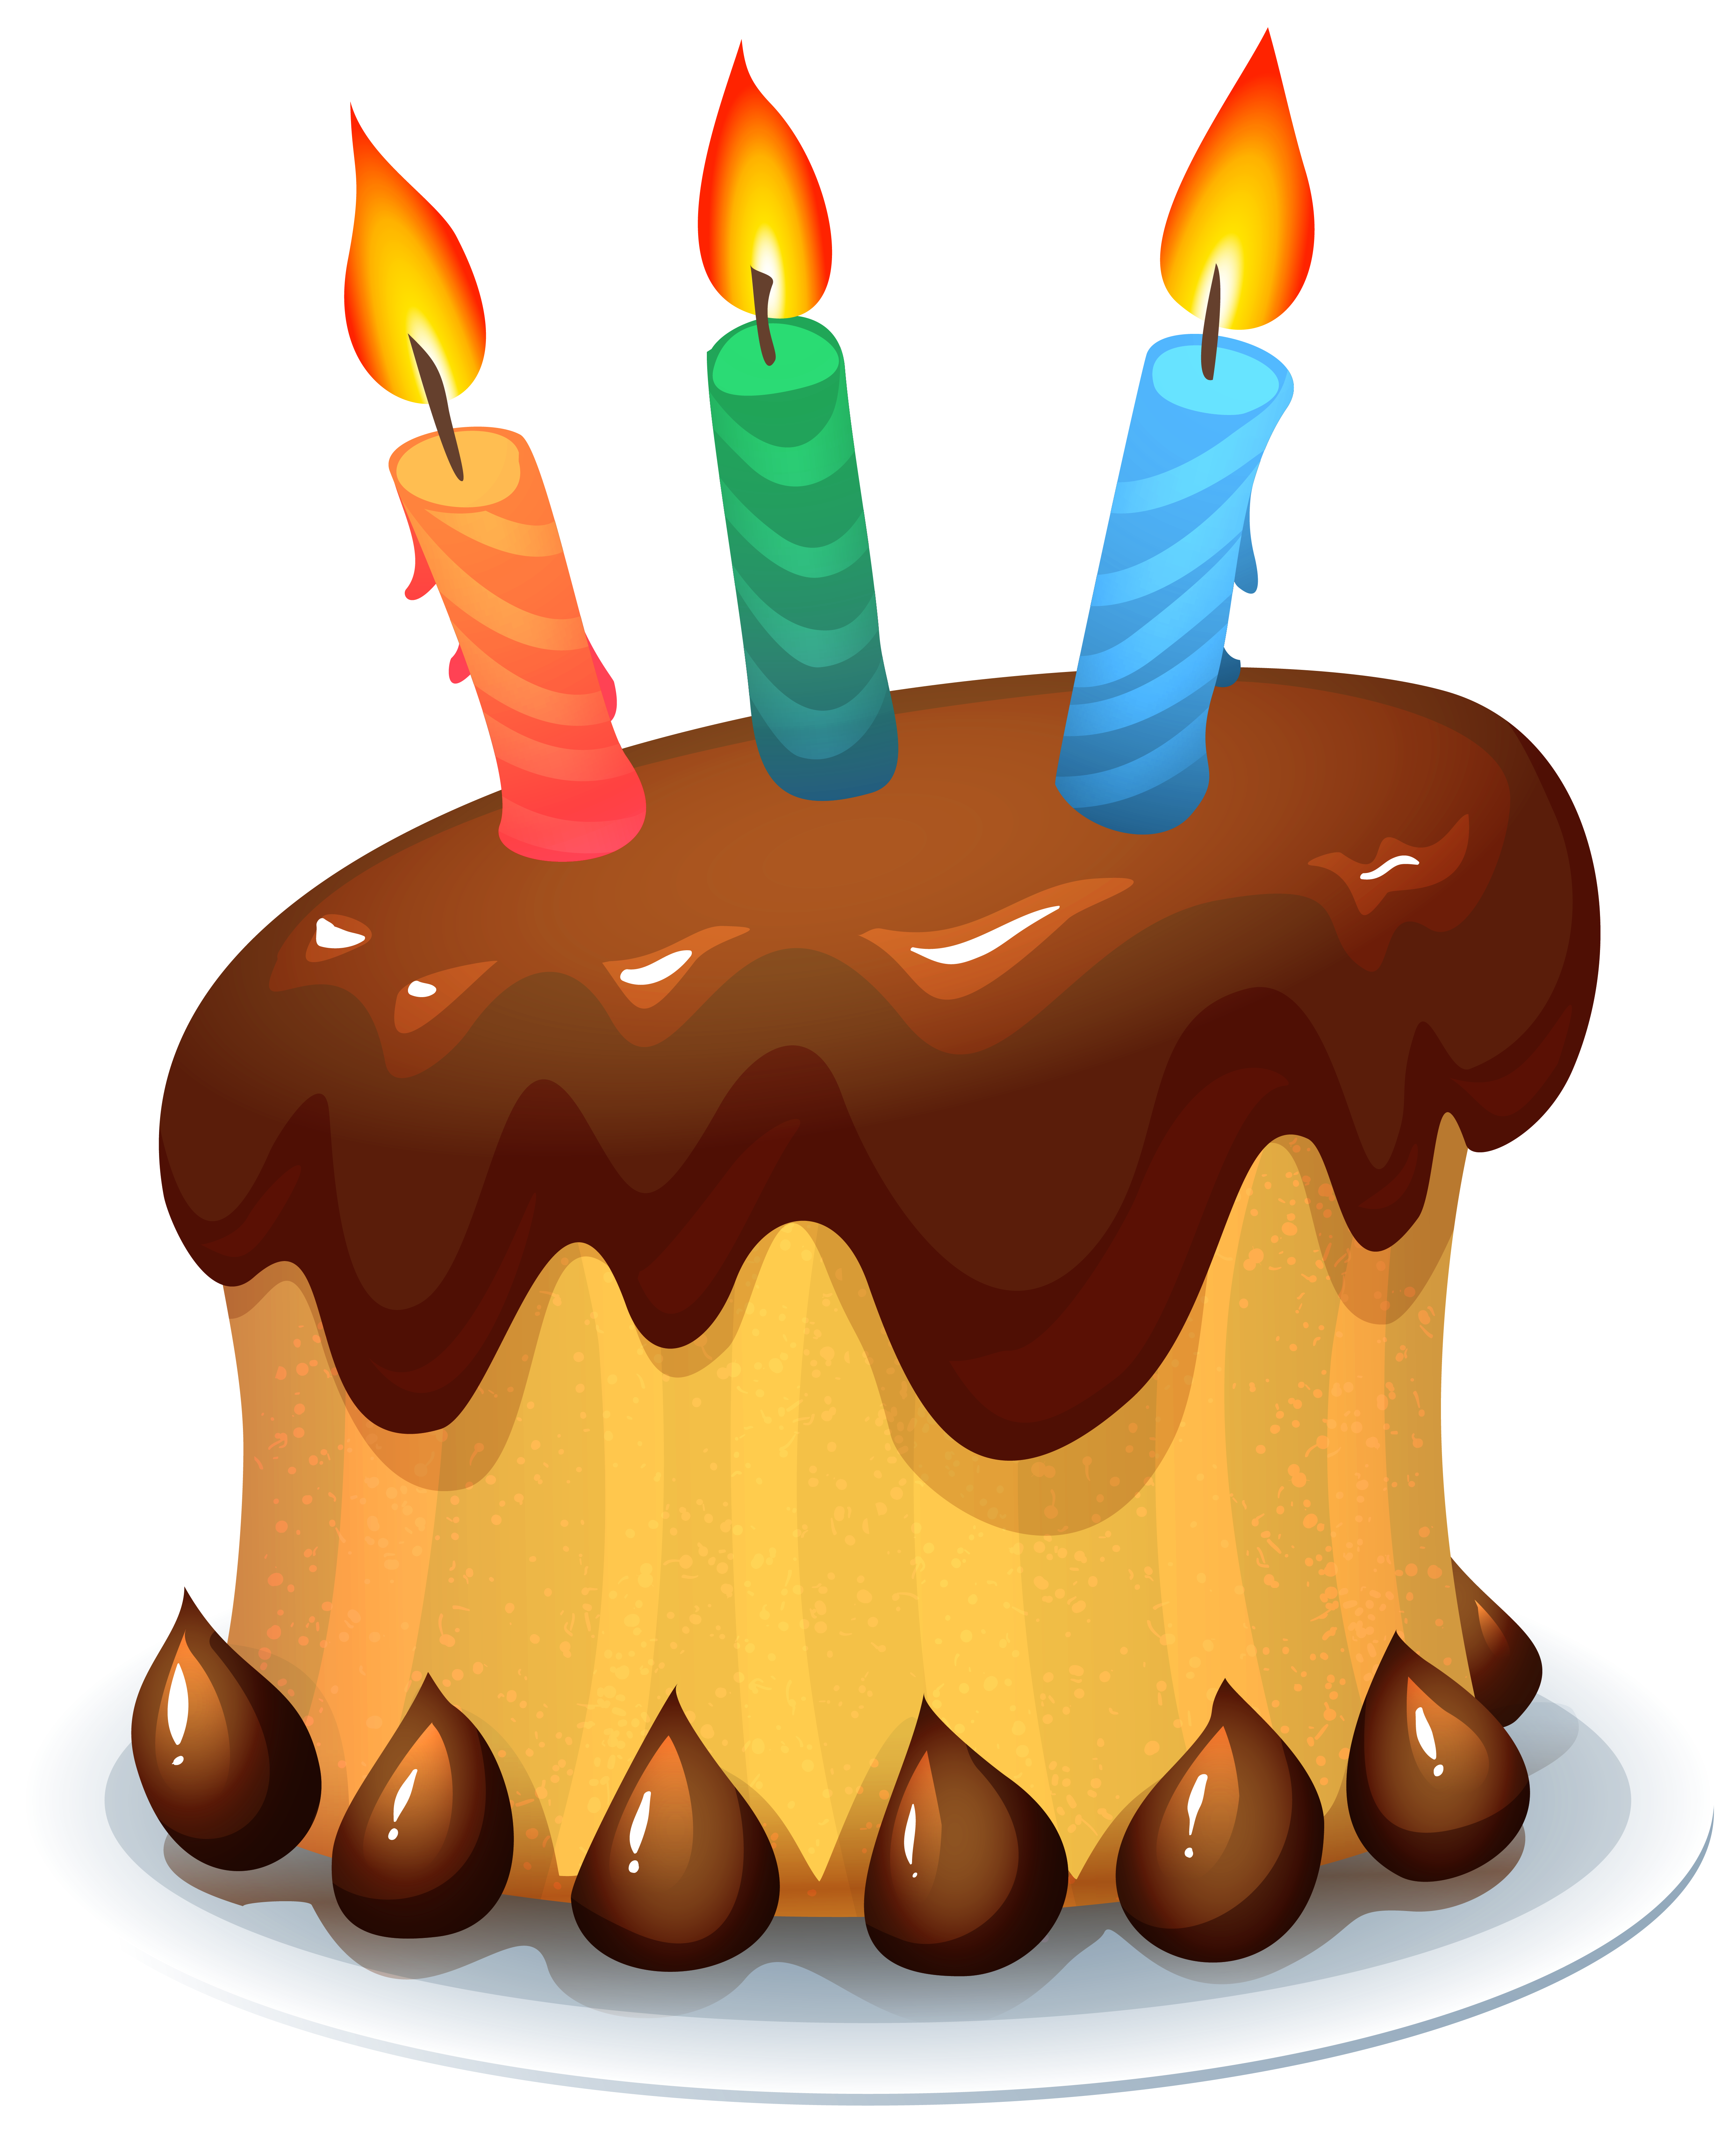 Three Dimensional PNG Picture, Three Dimensional Chocolate Birthday Cake,  Cake, Chocolate, Macaron PNG Image For Free Download